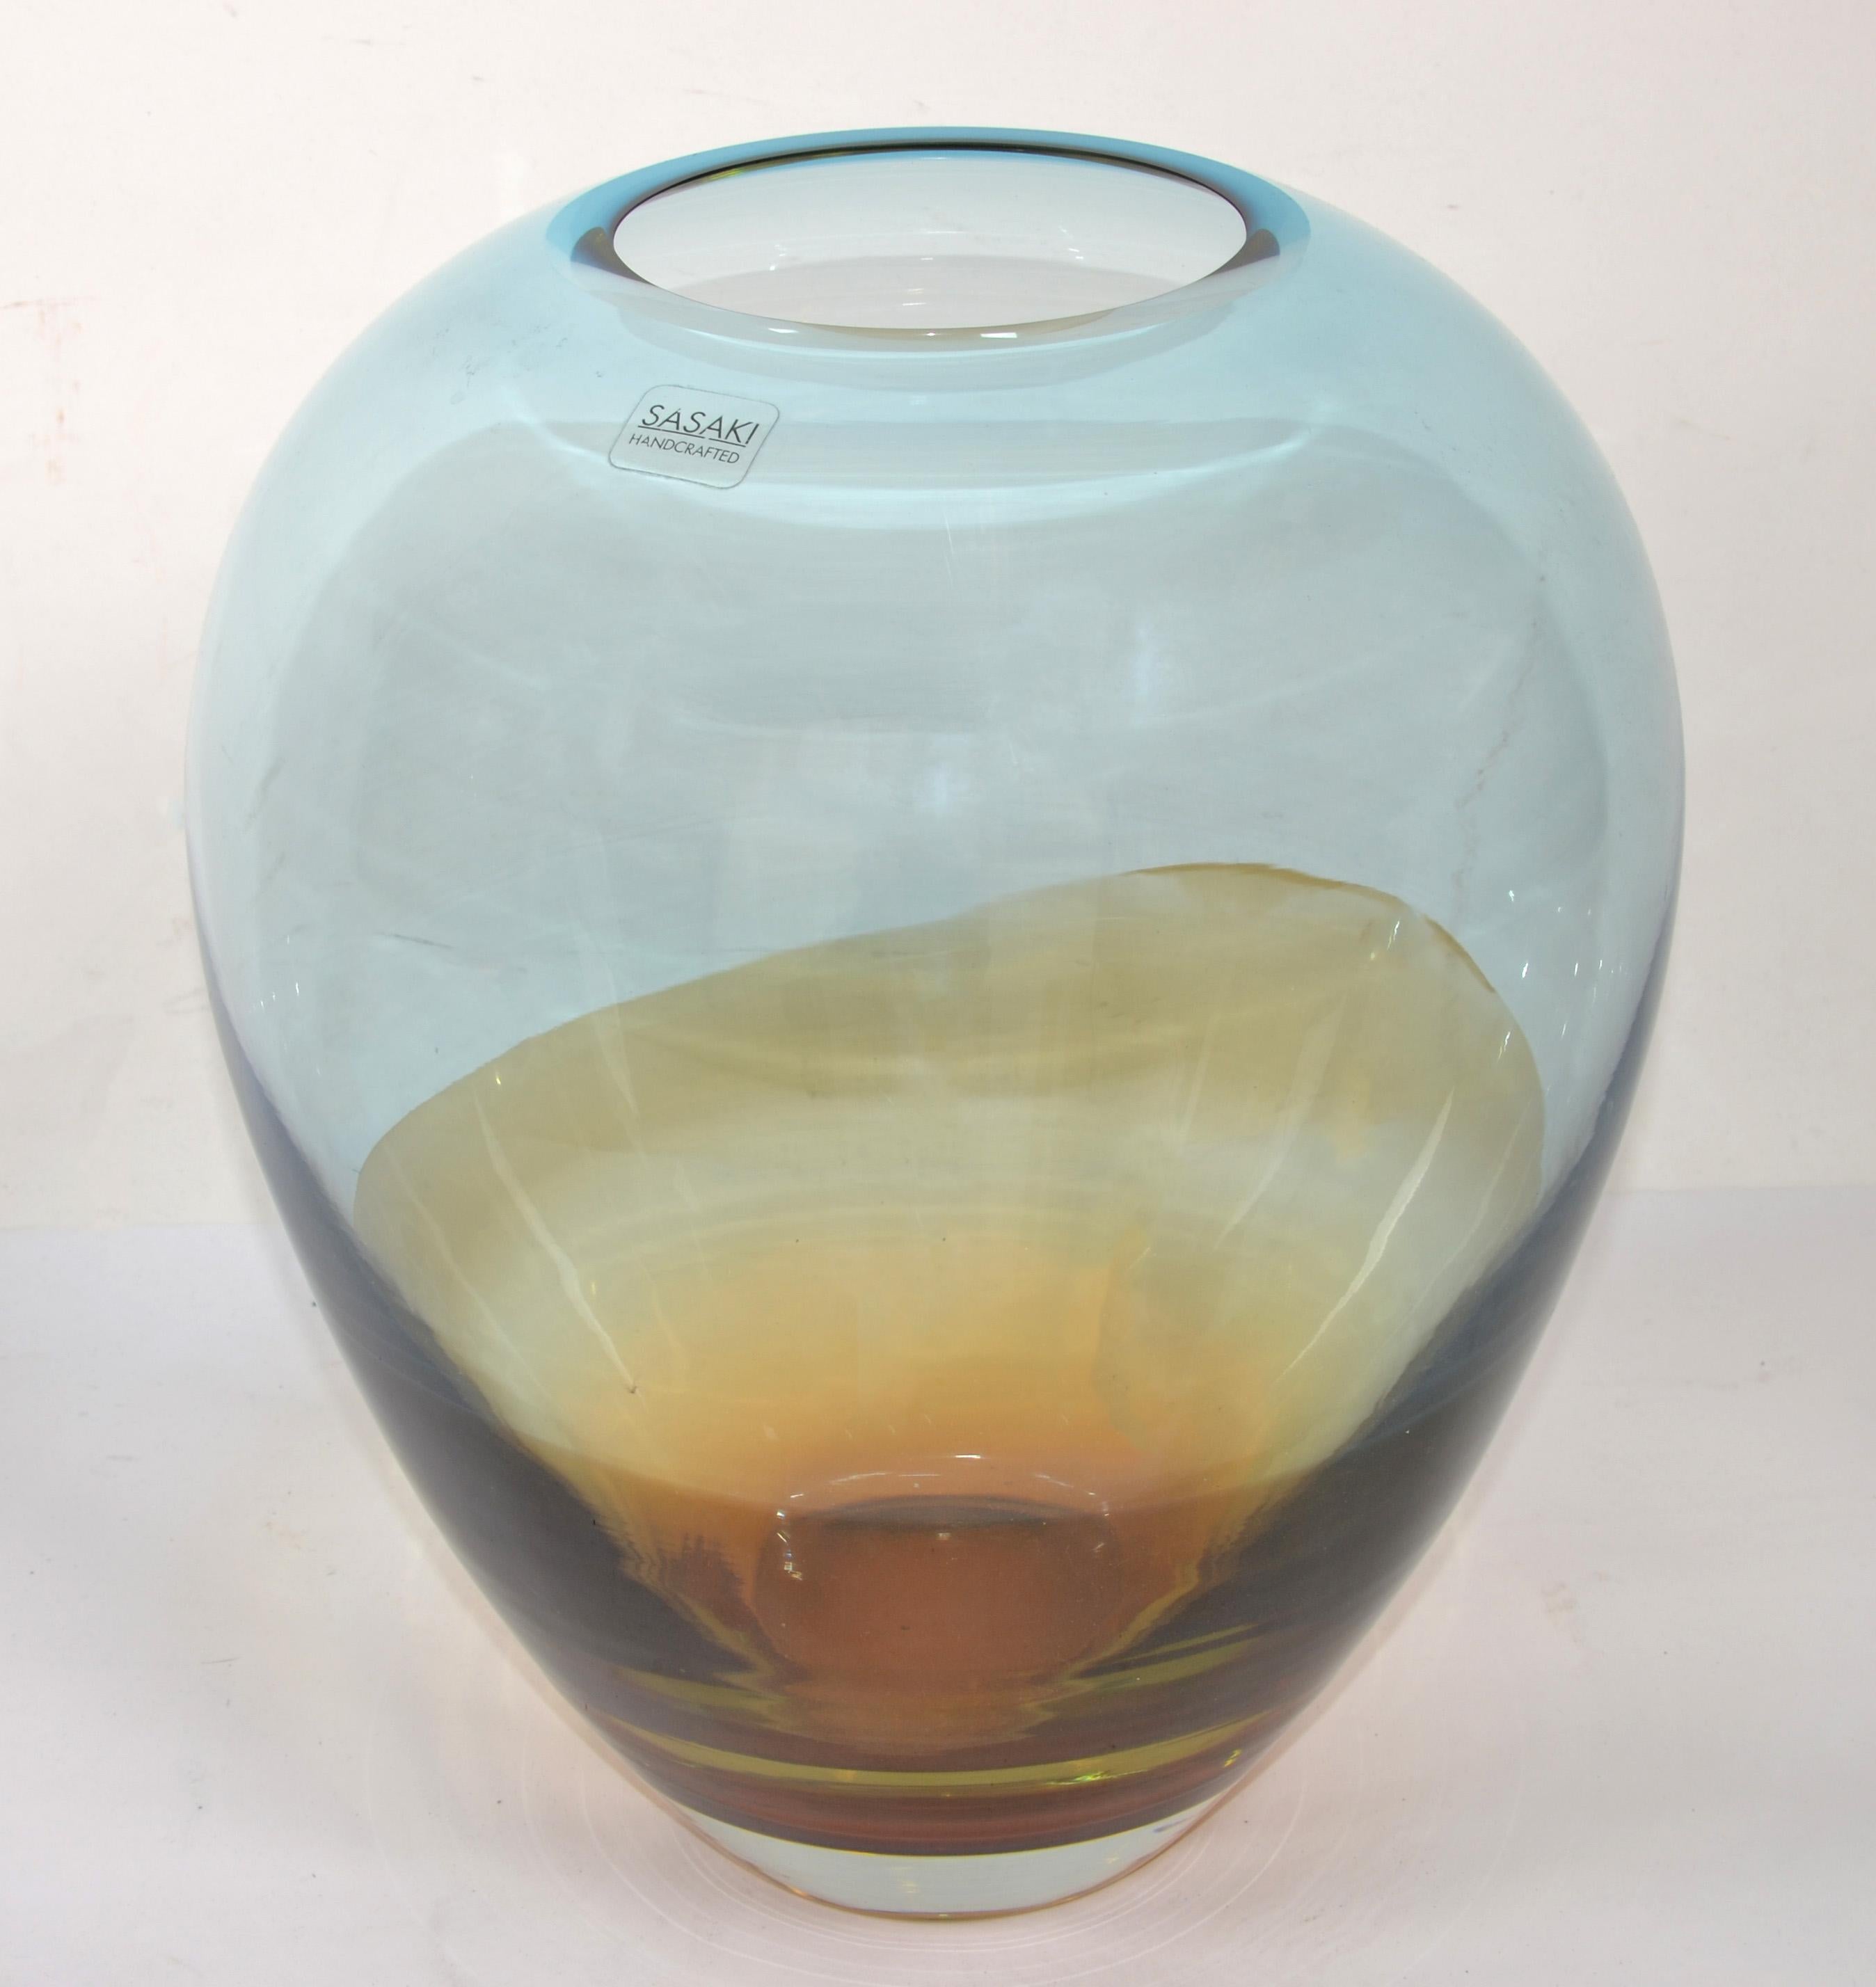 Sasaki Handcrafted oval encased Art Glass flower vase in Baby Blue and hue of Amber Gold with transparent interior.
Venetian Blown Murano Style and a very heavy Vessel, Centerpiece or Flower Vase.
Marked Sasaki Handcrafted at the Top.
In good